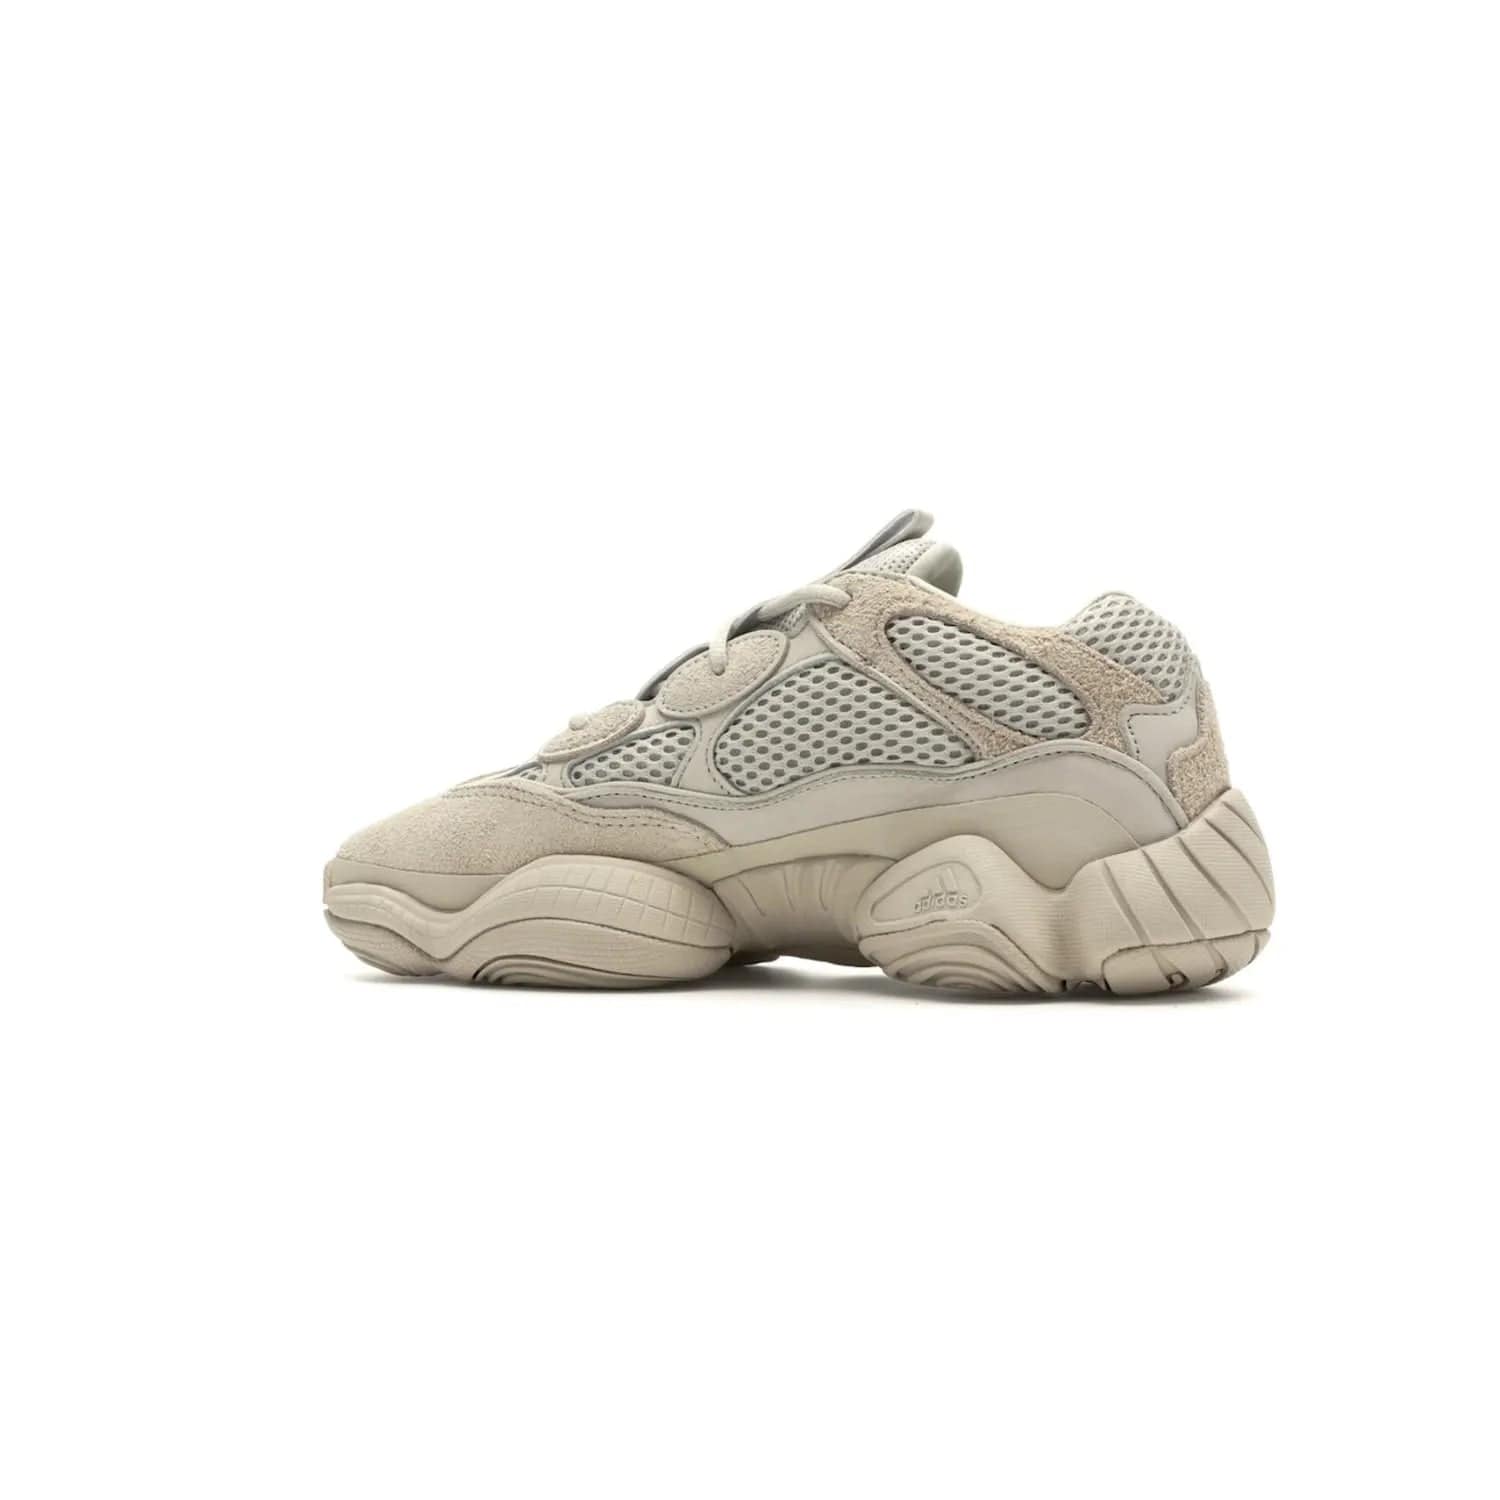 adidas Yeezy 500 Blush - Image 21 - Only at www.BallersClubKickz.com - Step up your sneaker game with the Adidas Yeezy 500 Blush. Monochromatic pale pink palette, hiking-inspired suede/mesh construction, plus adiPRENE sole for comfort and performance. Get the Adidas Yeezy 500 and experience true style and comfort.